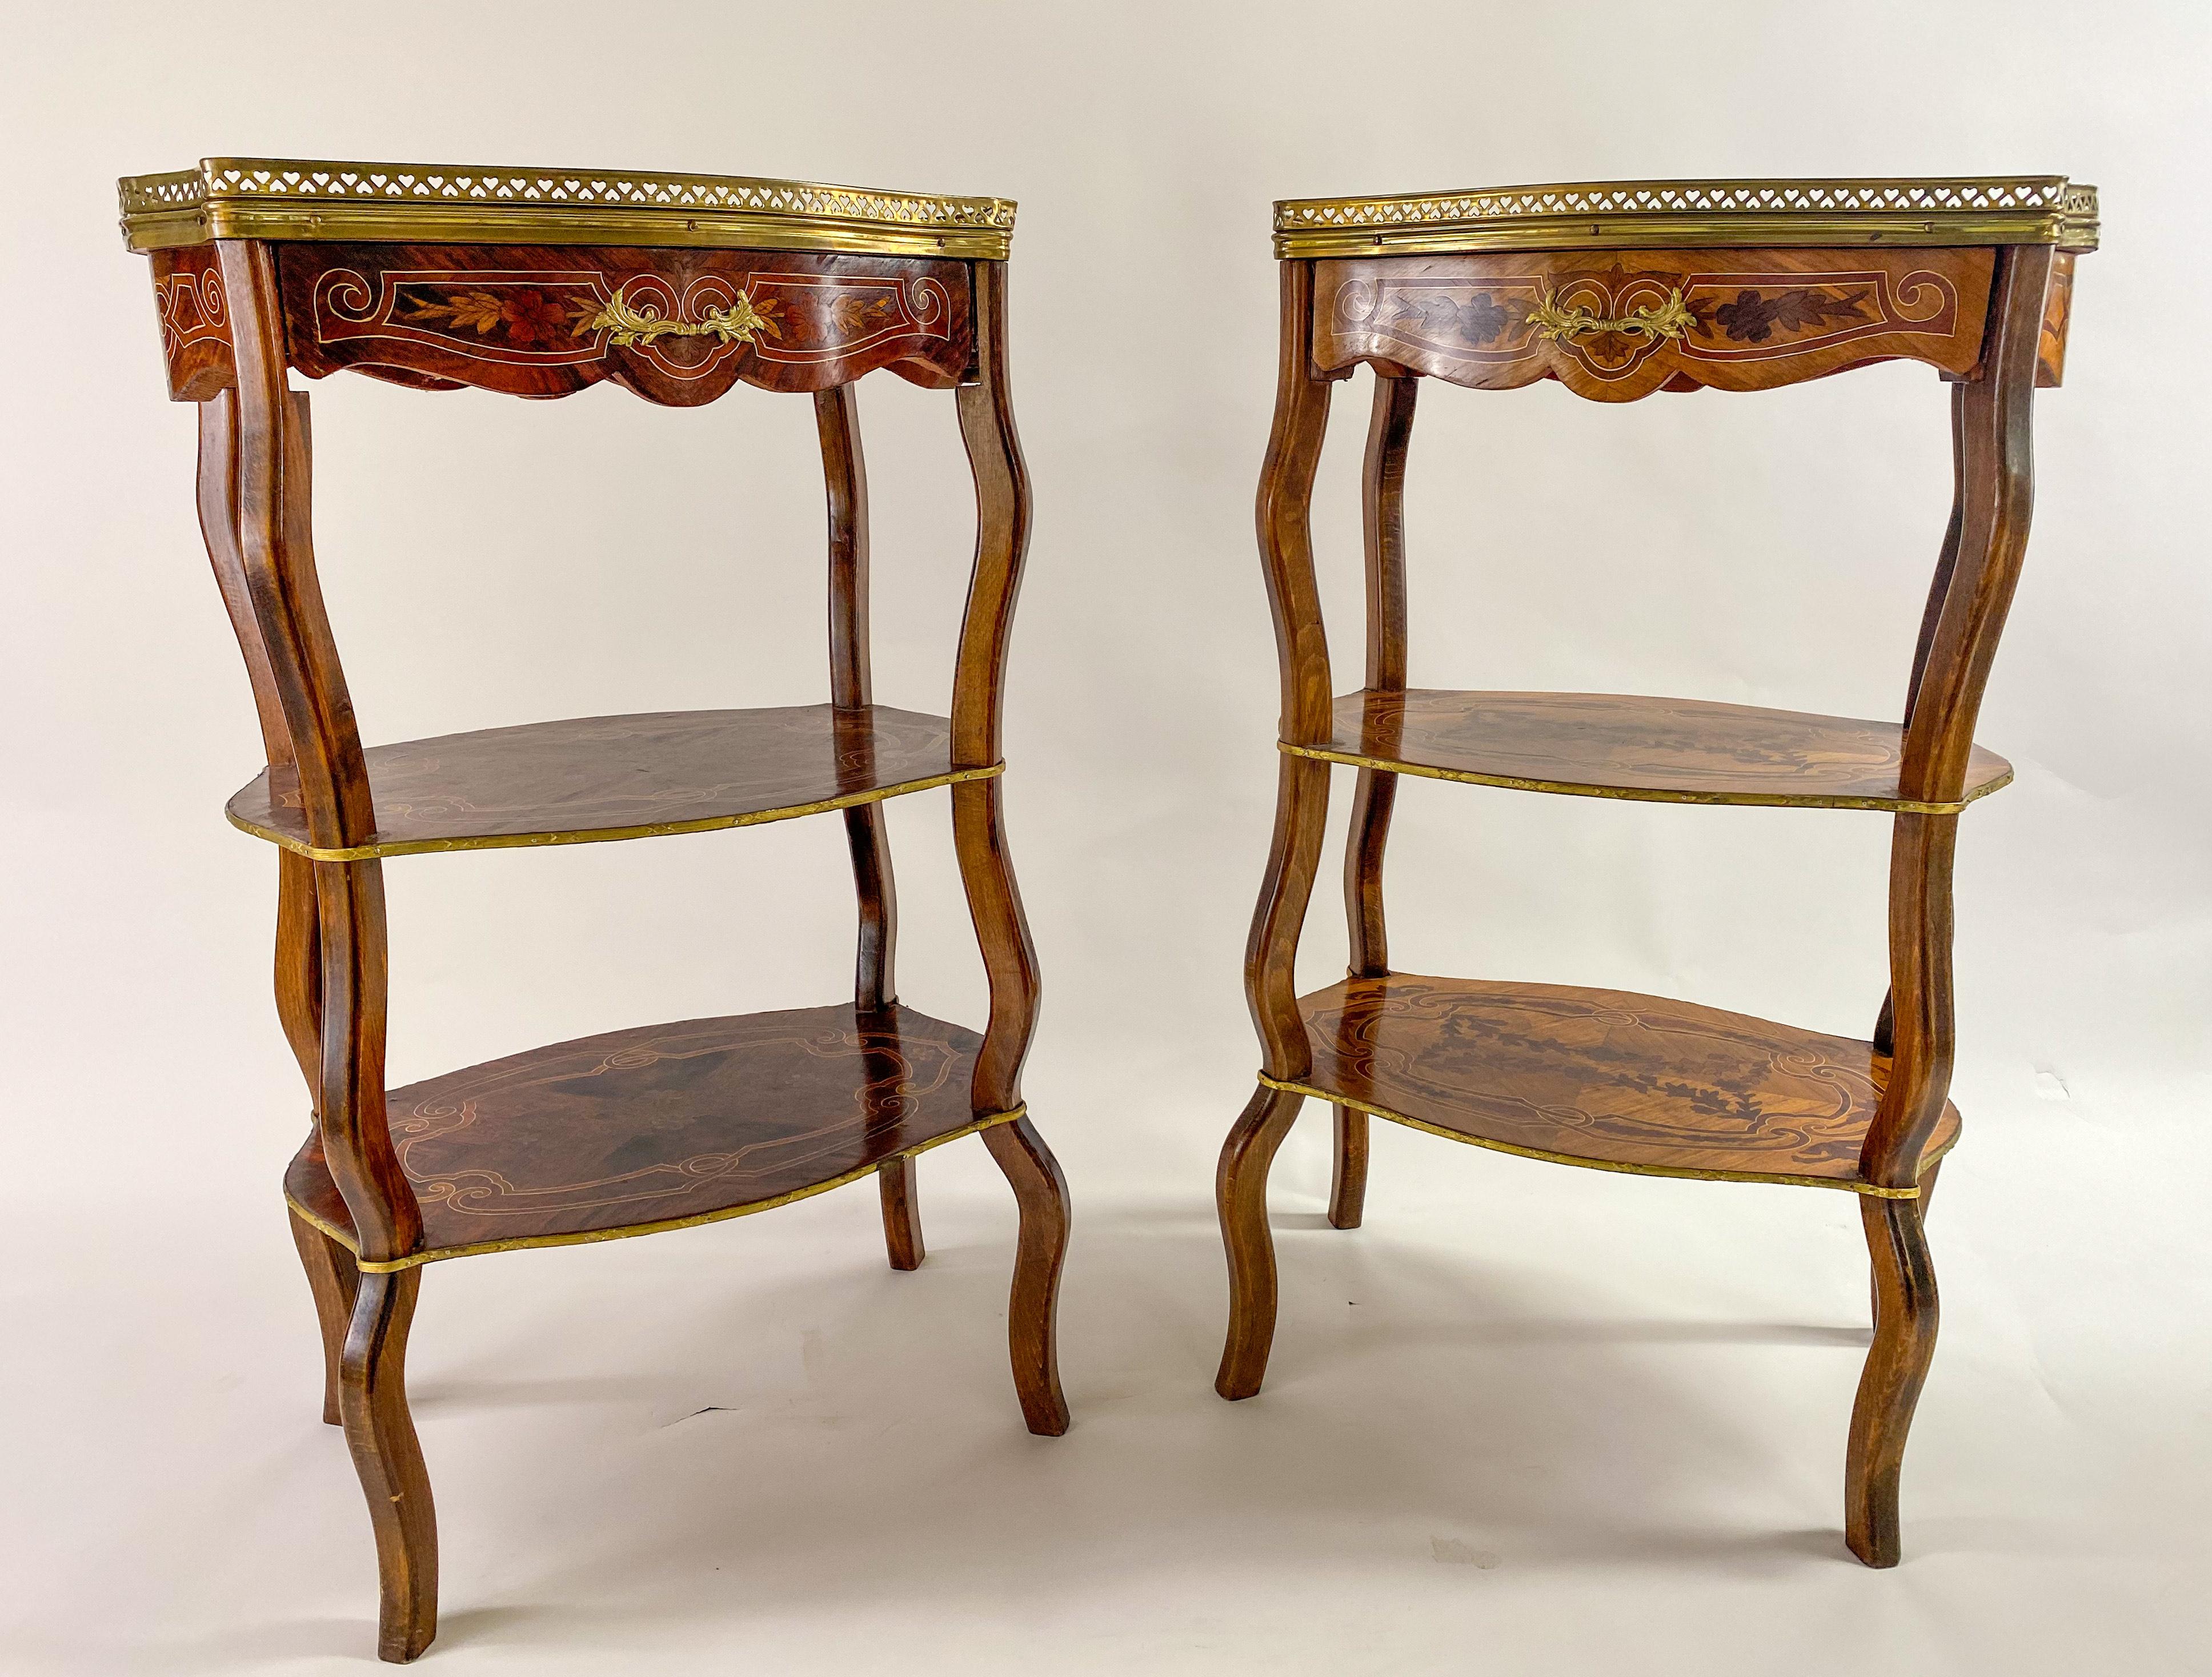 An elegant compatible pair of French Transitional style three-tiered marquetry inlaid side , end or serving tables in the manner of the Charles Topino, cabinet maker (French, 1742–1803 Paris). Expertly carved of quality tulip wood, each table